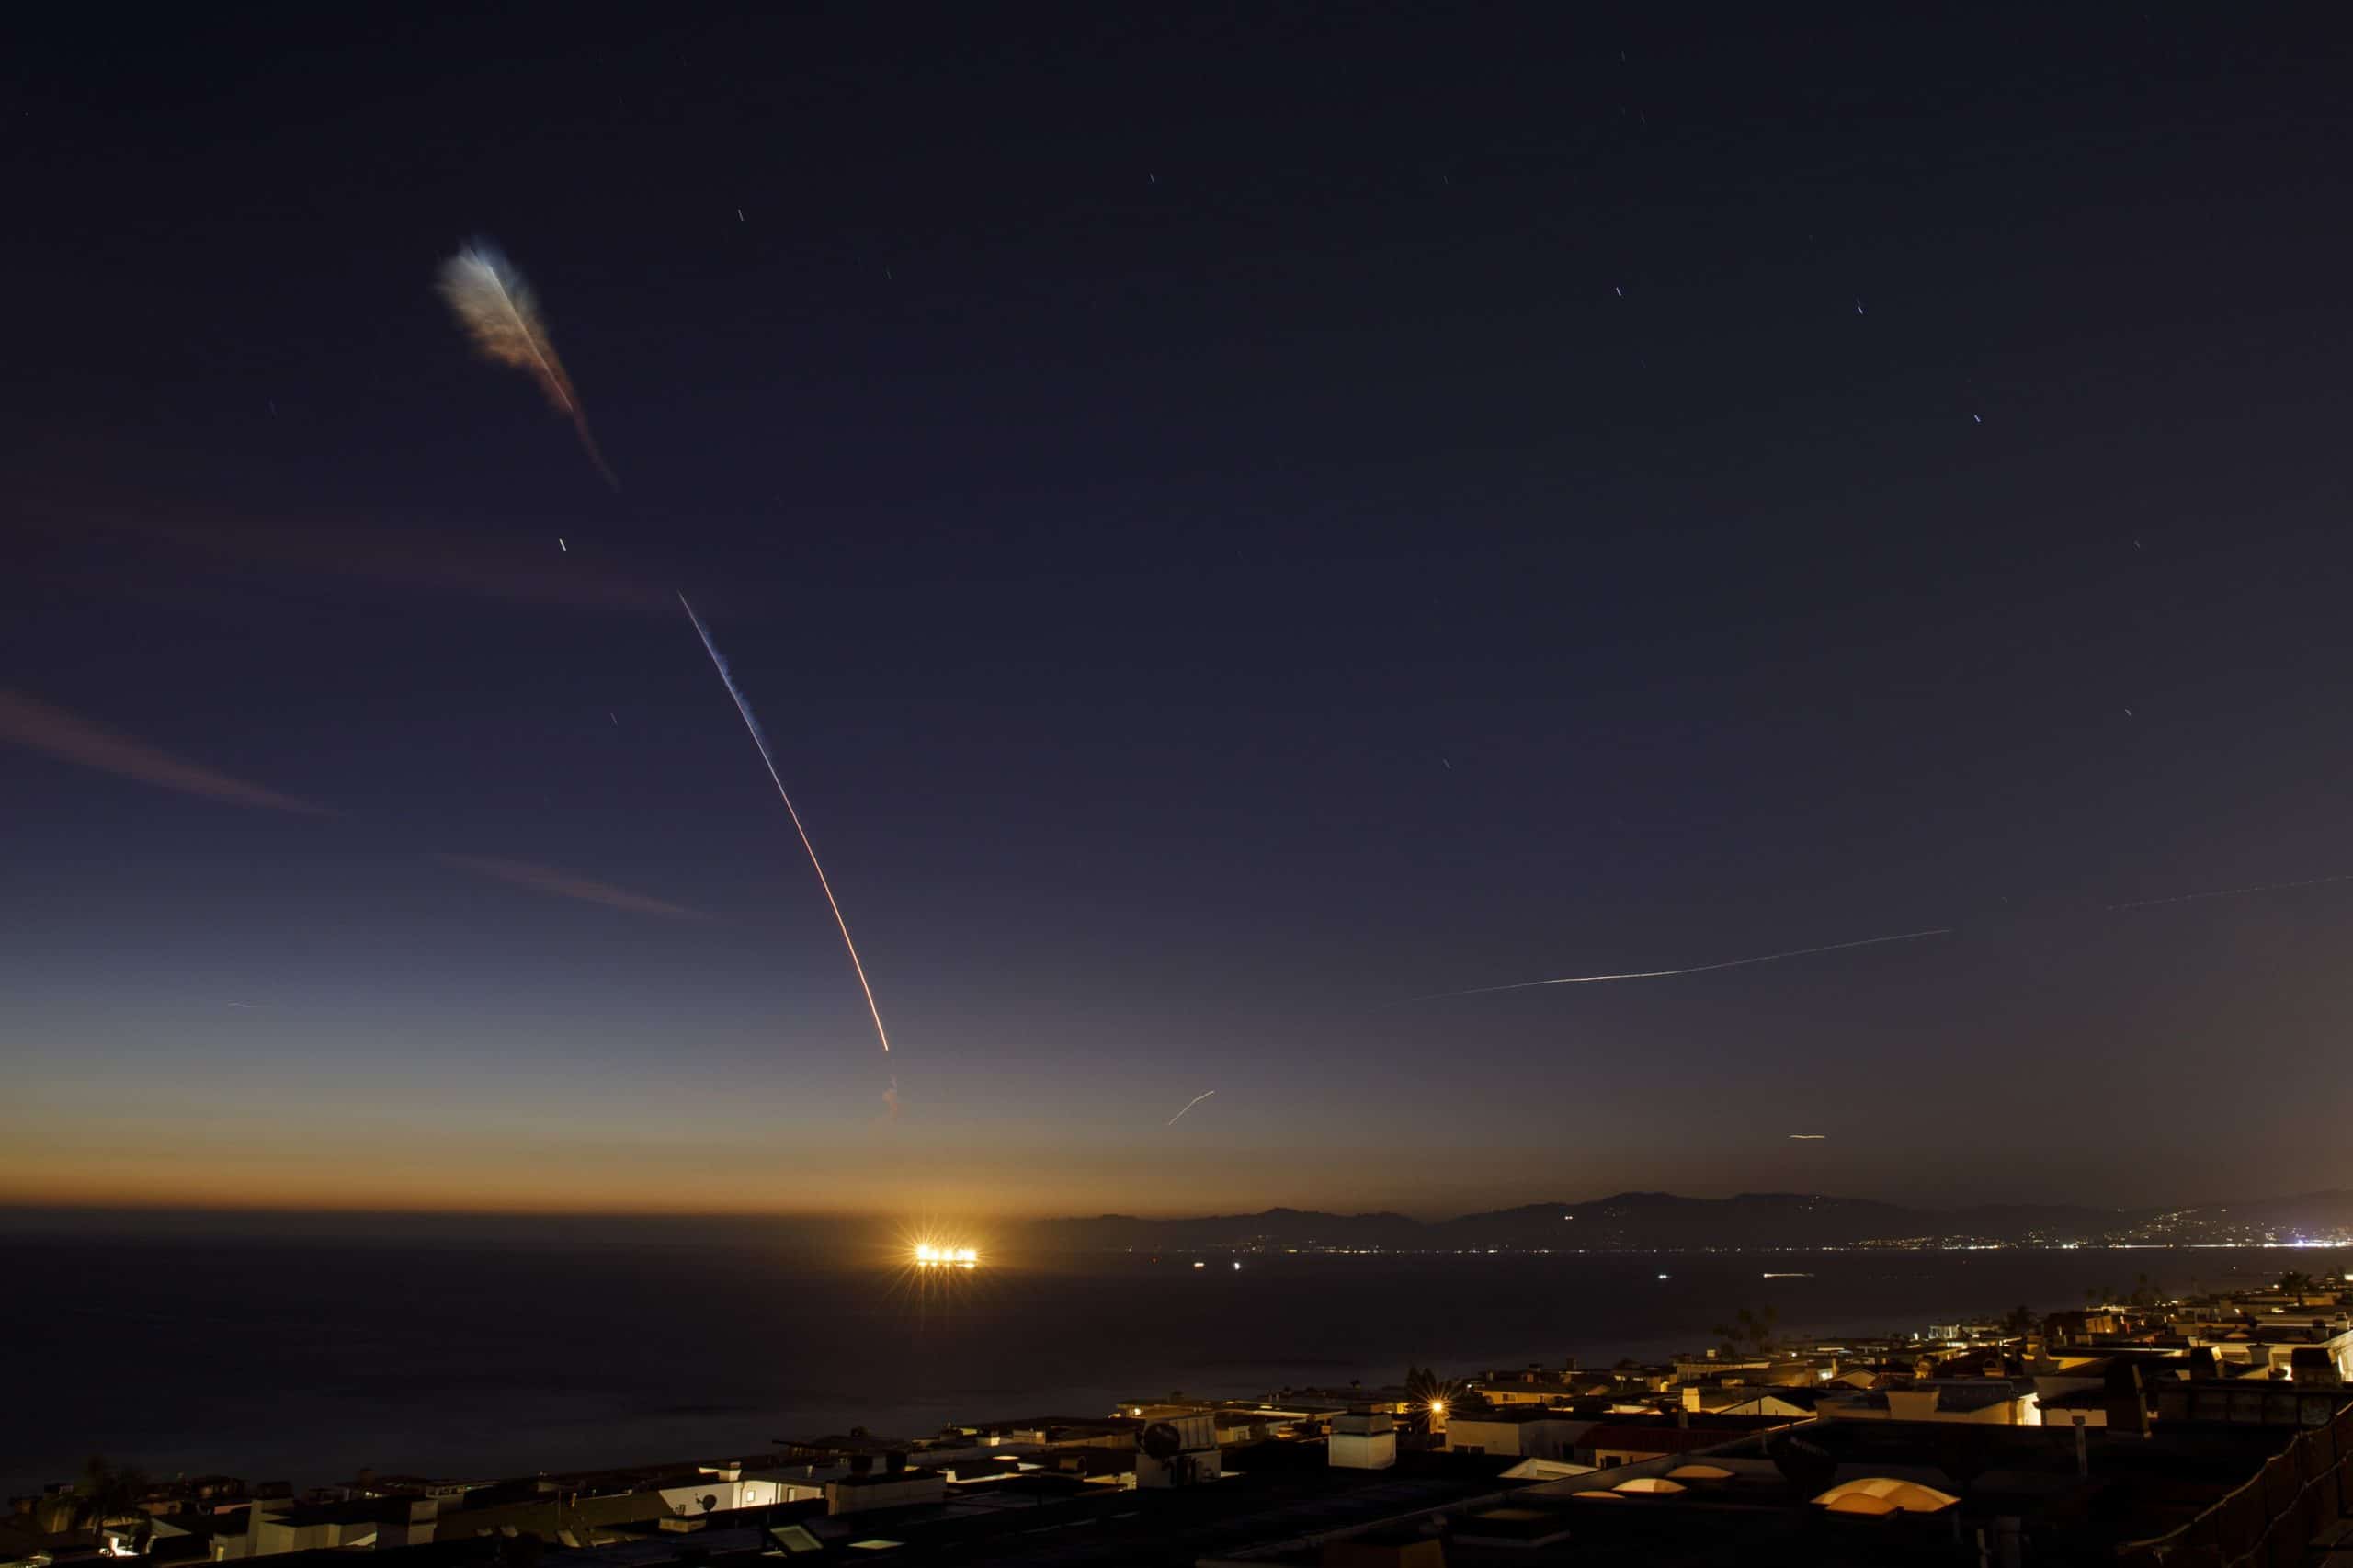 HOLD FOR FARAH CONSIDERATION - A Space Exploration Technologies Corp. (SpaceX) Falcon 9 rocket lights up the evening sky over Manhattan Beach, California as it carries an Argentinian Earth-observing satellite into space after blasting off from Vandenberg Air Force Base on Sunday, October 7, 2018 in Manhattan Beach, California.  2018 Patrick T. Fallon